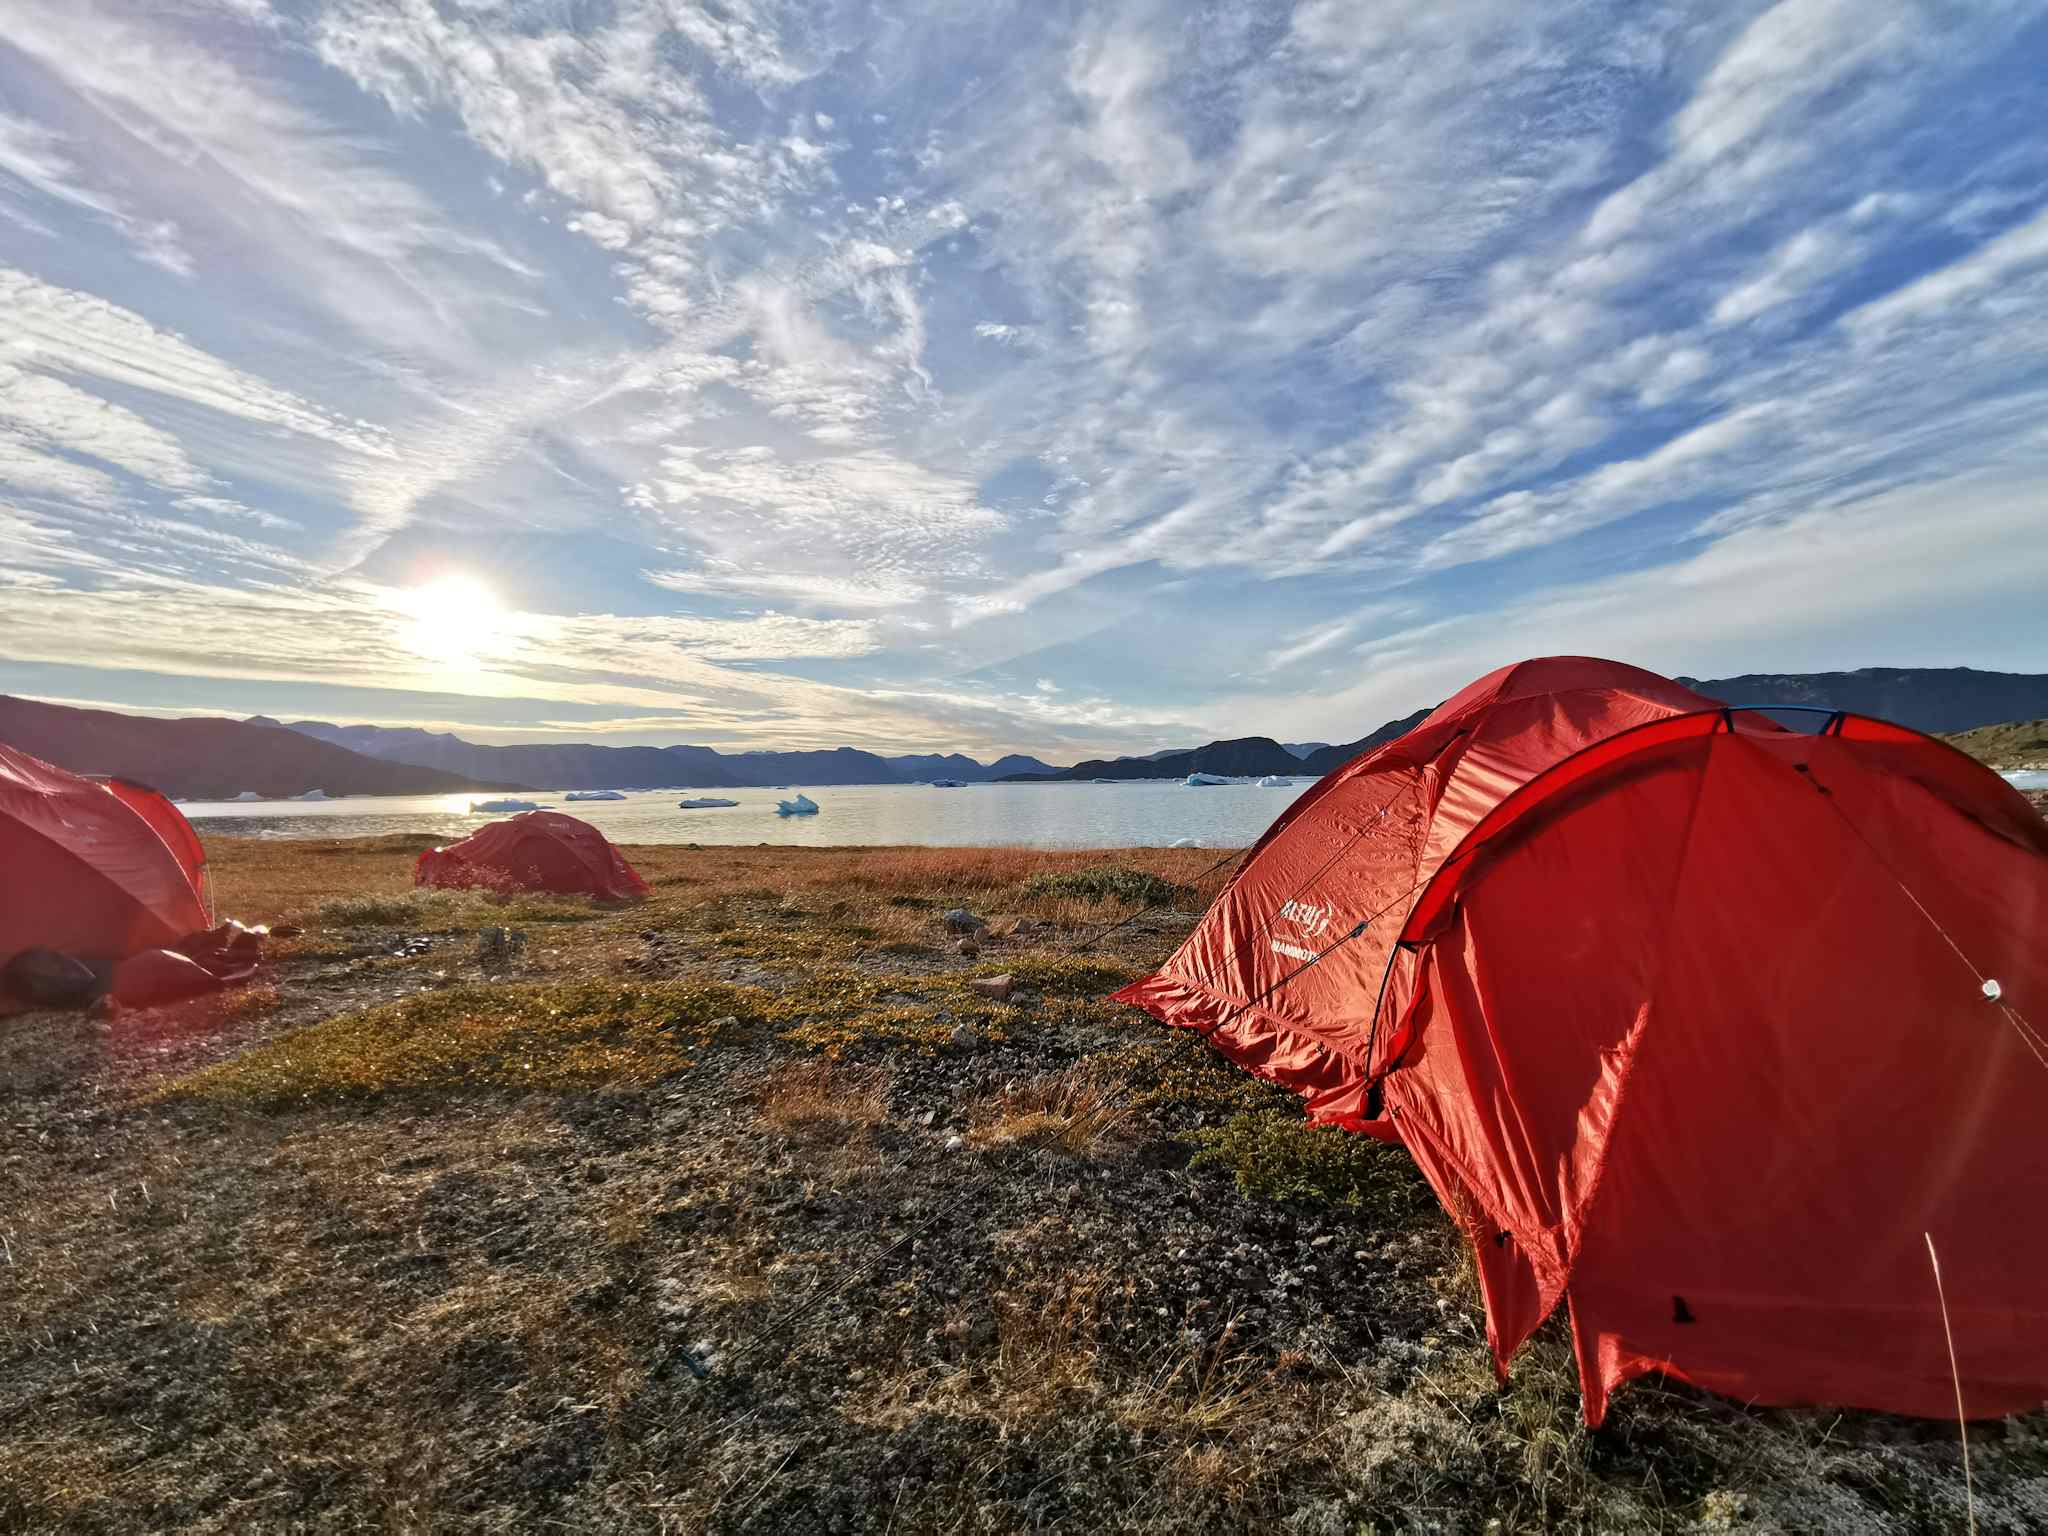 Tents set up in a wild camping location in Greenland. Photo: Customer/Nicole Morgan.